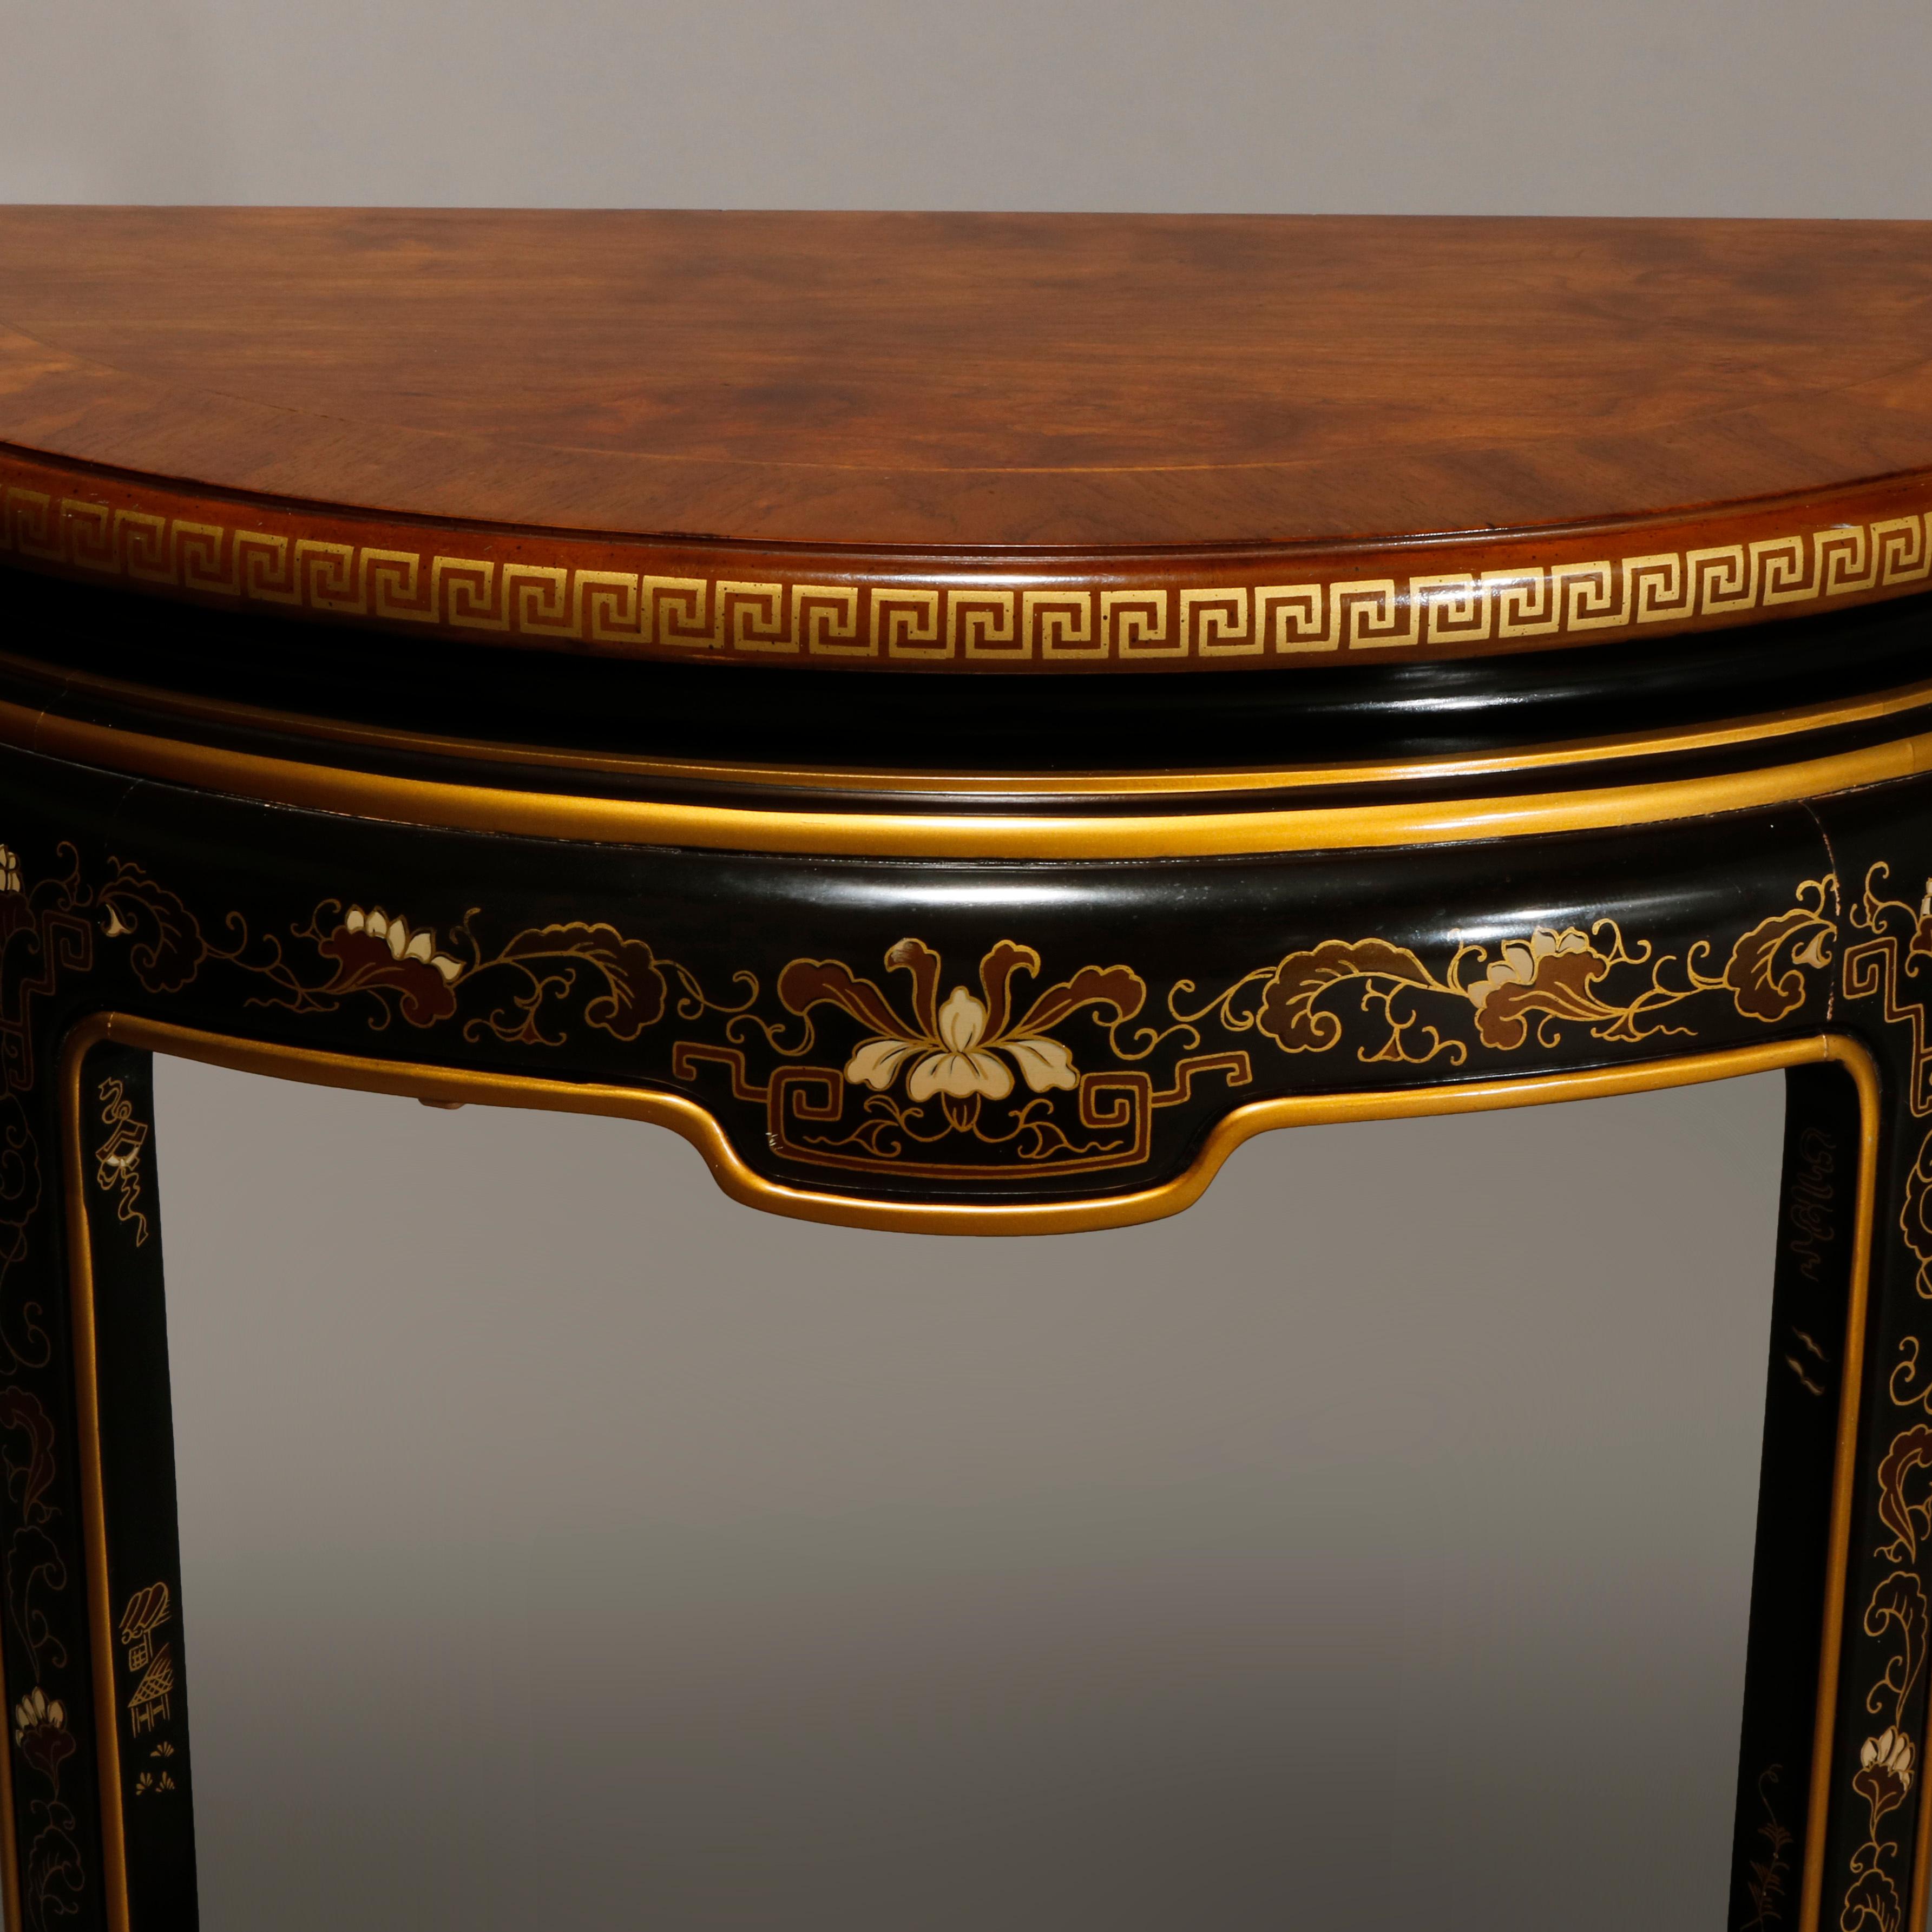 An antique console by Drexel Heritage offers demilune form with flame mahogany cross banded top having gilt Greek Key bornering and surmounting ebonized base having foliate and scroll Chinoiserie decoration with gilt highlights throughout, makers